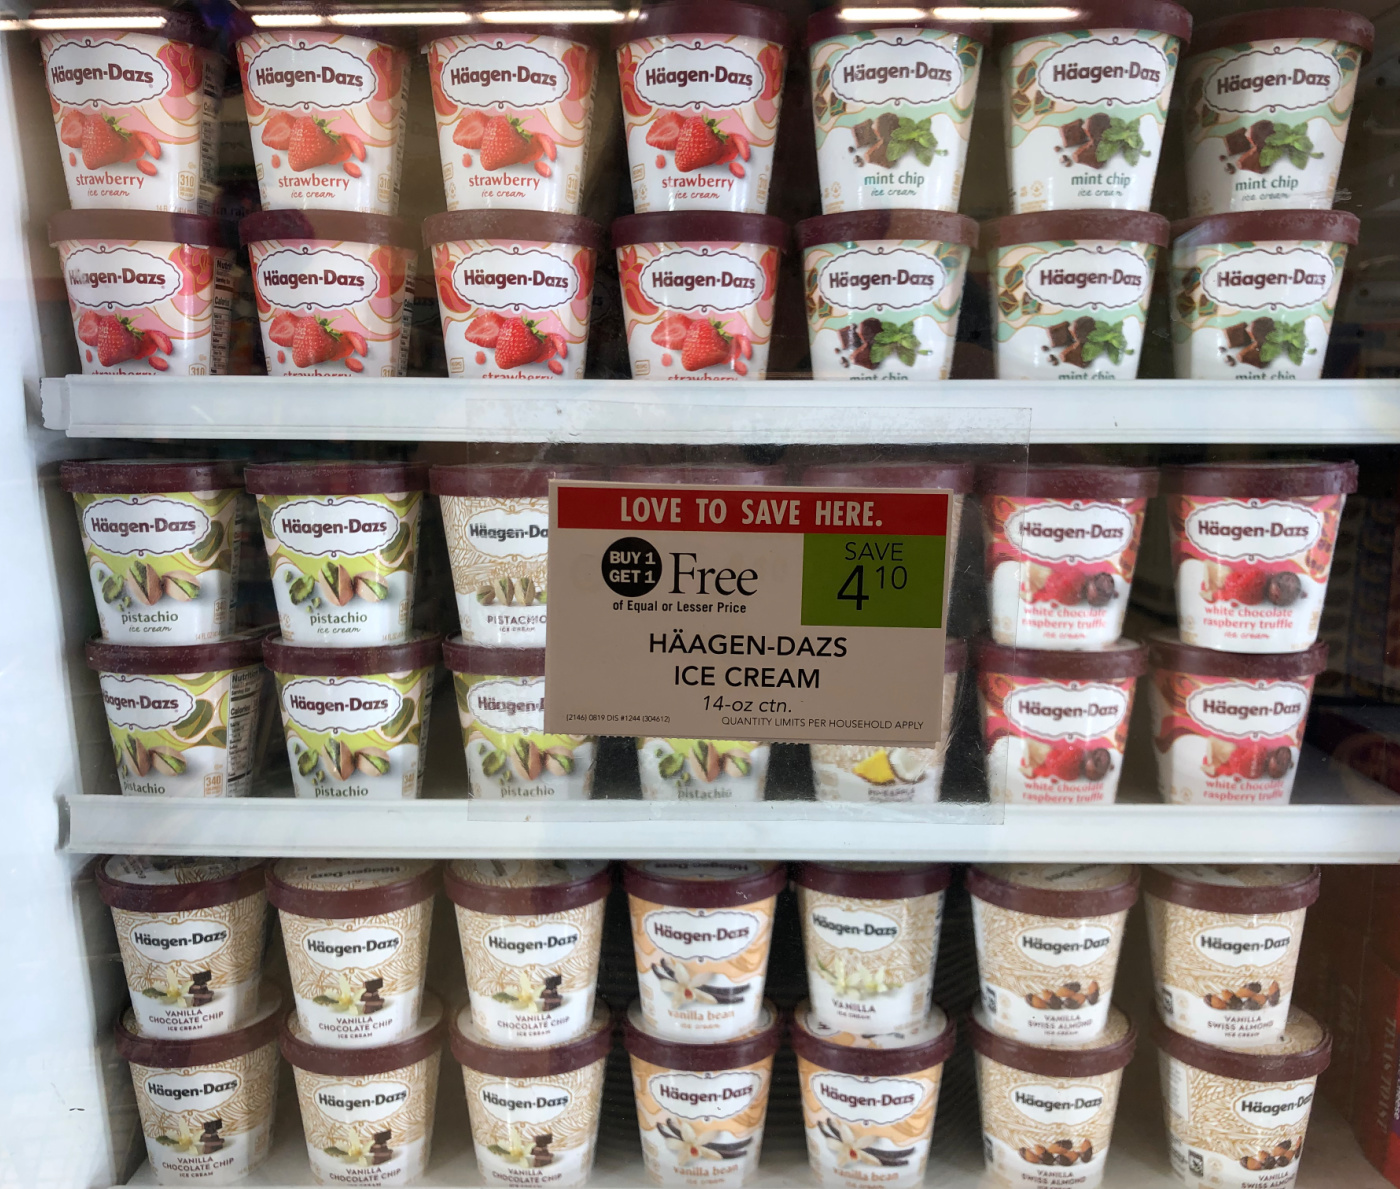 Keep The Summer Fun Going WIth The Delicious Taste Of Häagen-Dazs® - Buy One, Get One FREE At Publix! on I Heart Publix